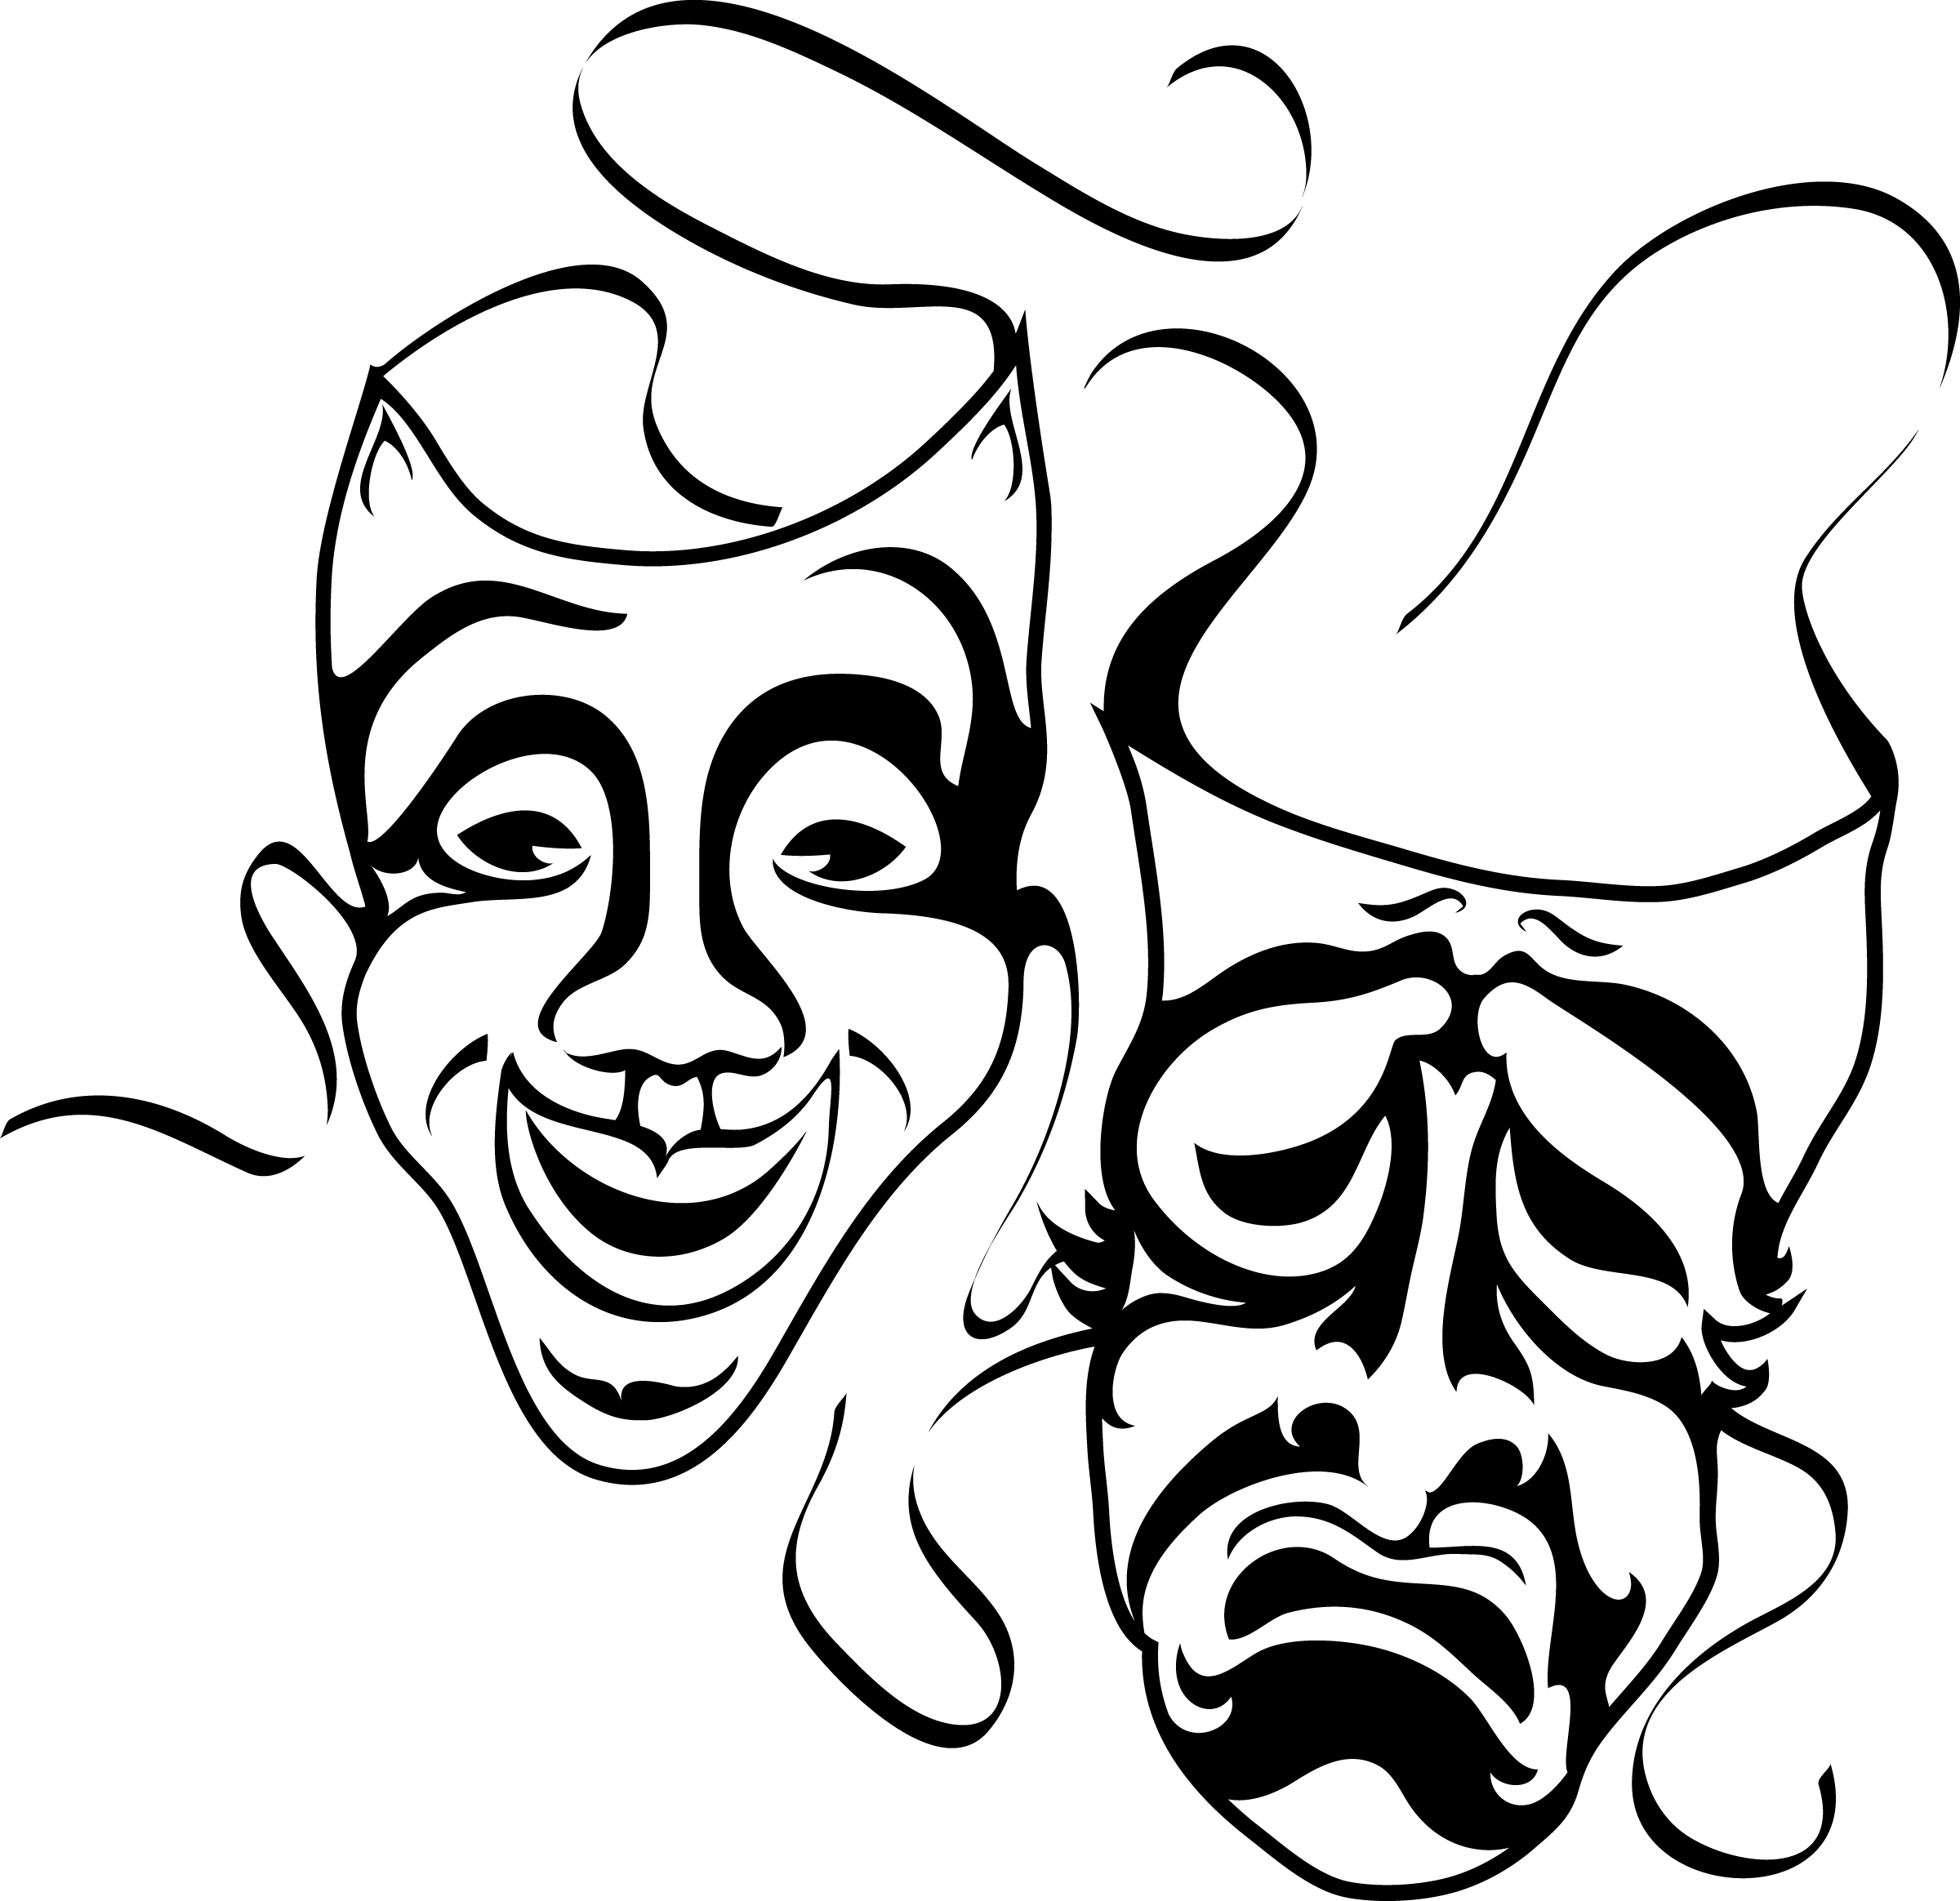 Comedy Drama Masks - ClipArt Best